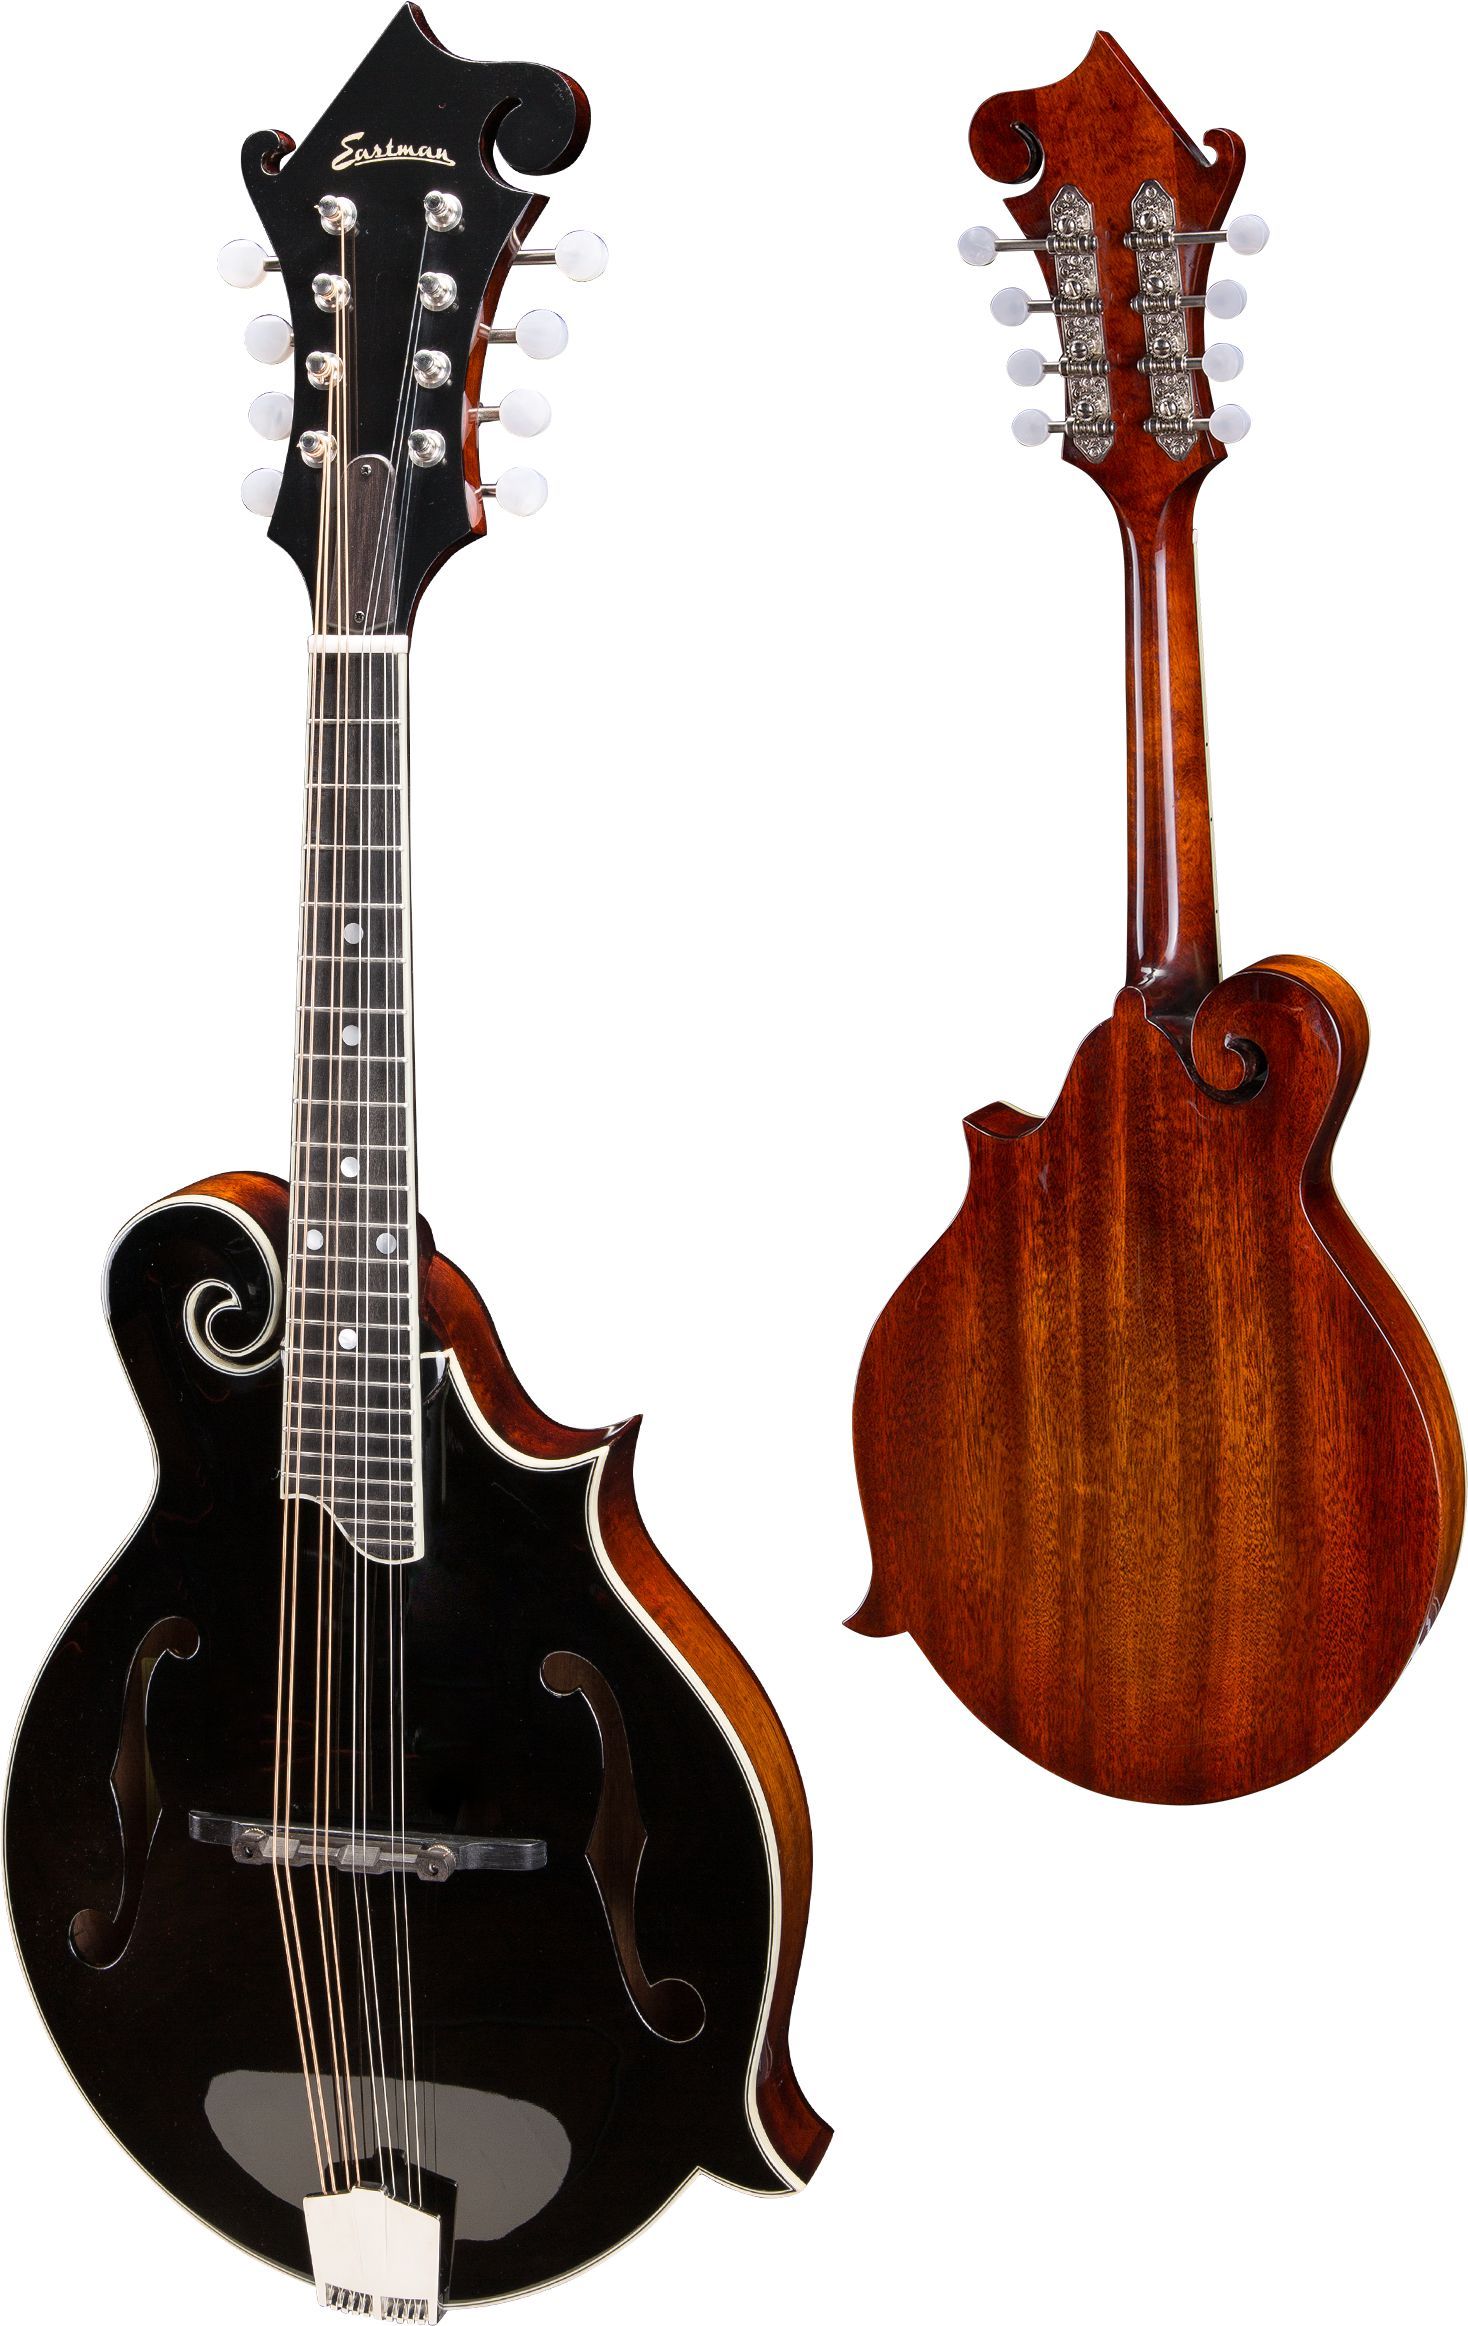 Eastman MD415 Black F-style Mandolin (F-holes, Solid Spruce top, Solid Mahogany back and sides, Black top, w/Case), Mandolin for sale at Richards Guitars.